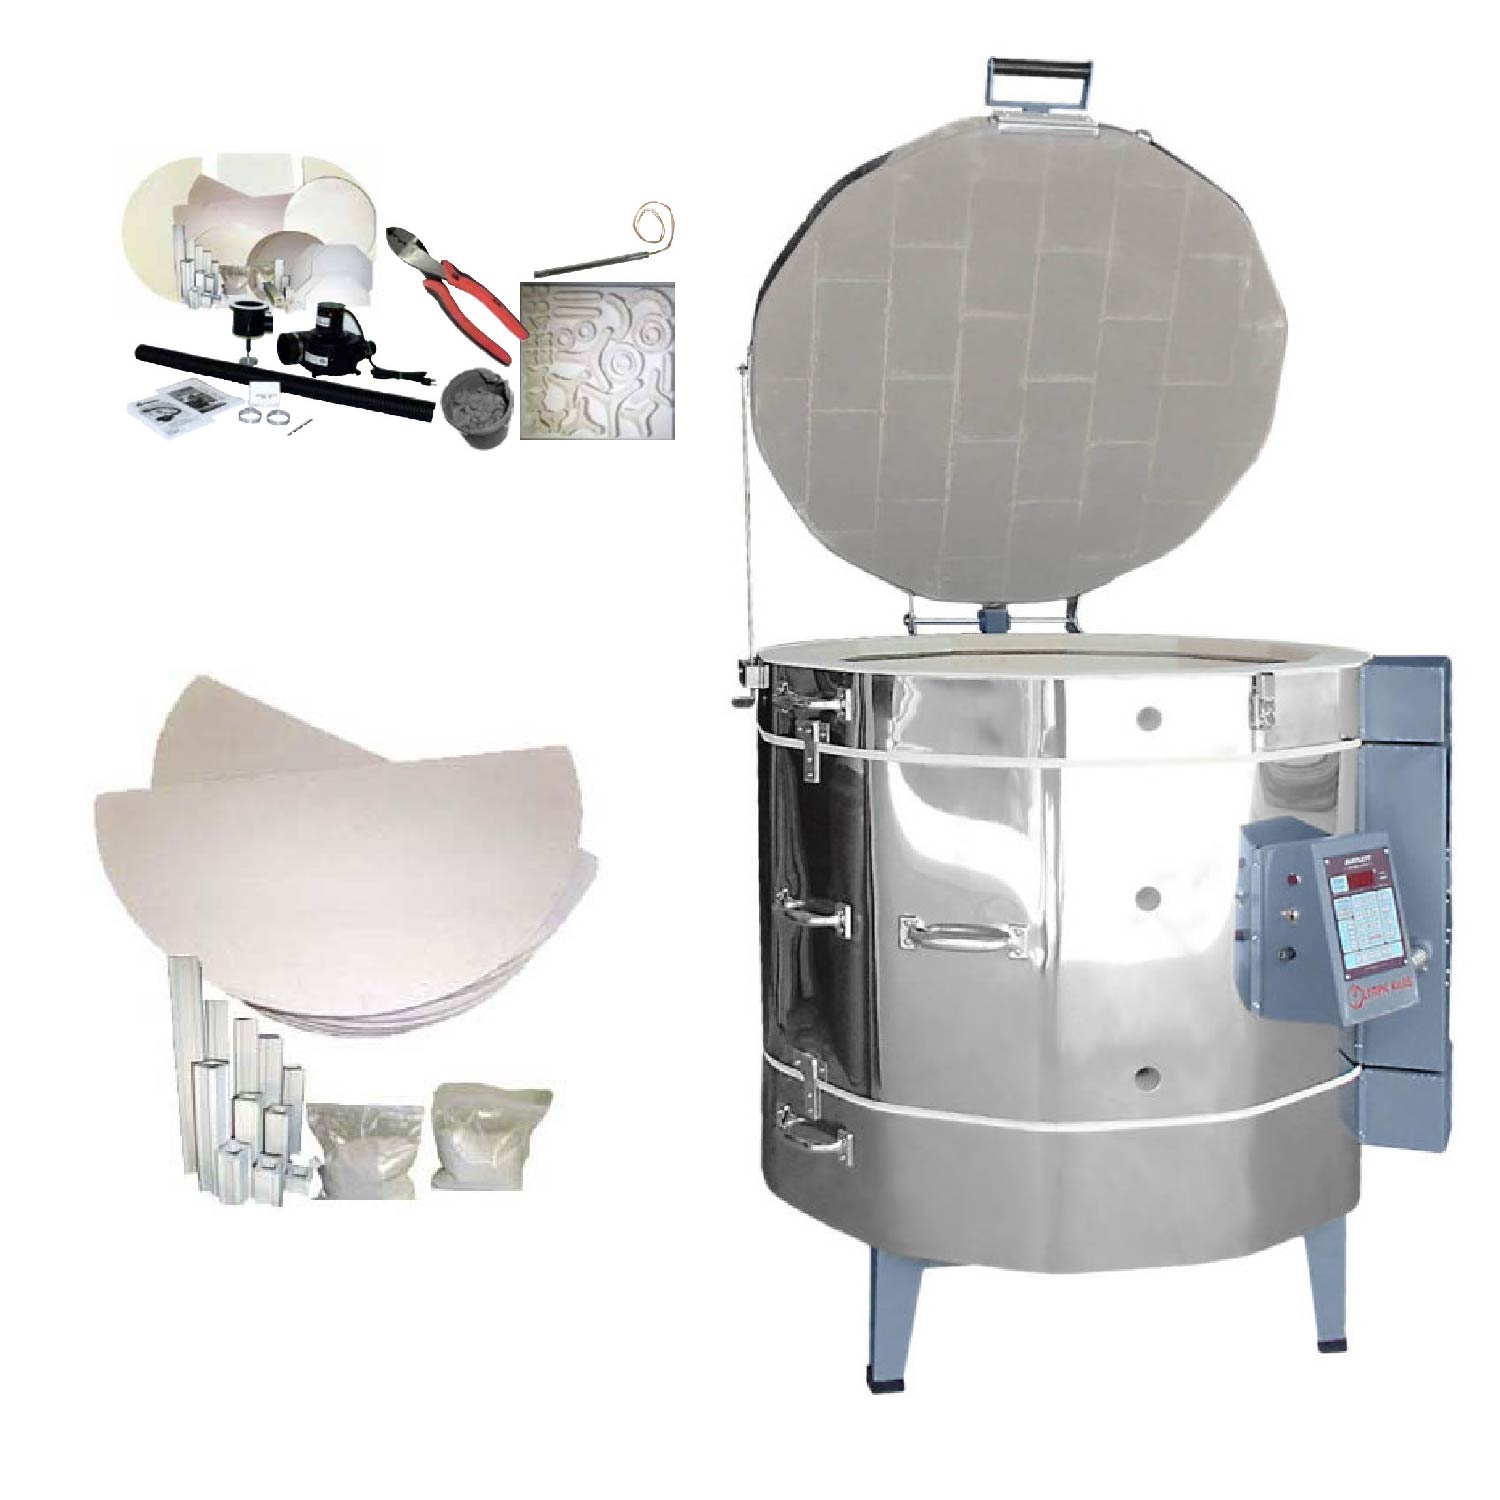 Olympic FREEDOM 2827HE KILN PACKAGE: Cone 10, Electronic Control with Vent, Furniture Kit and More!